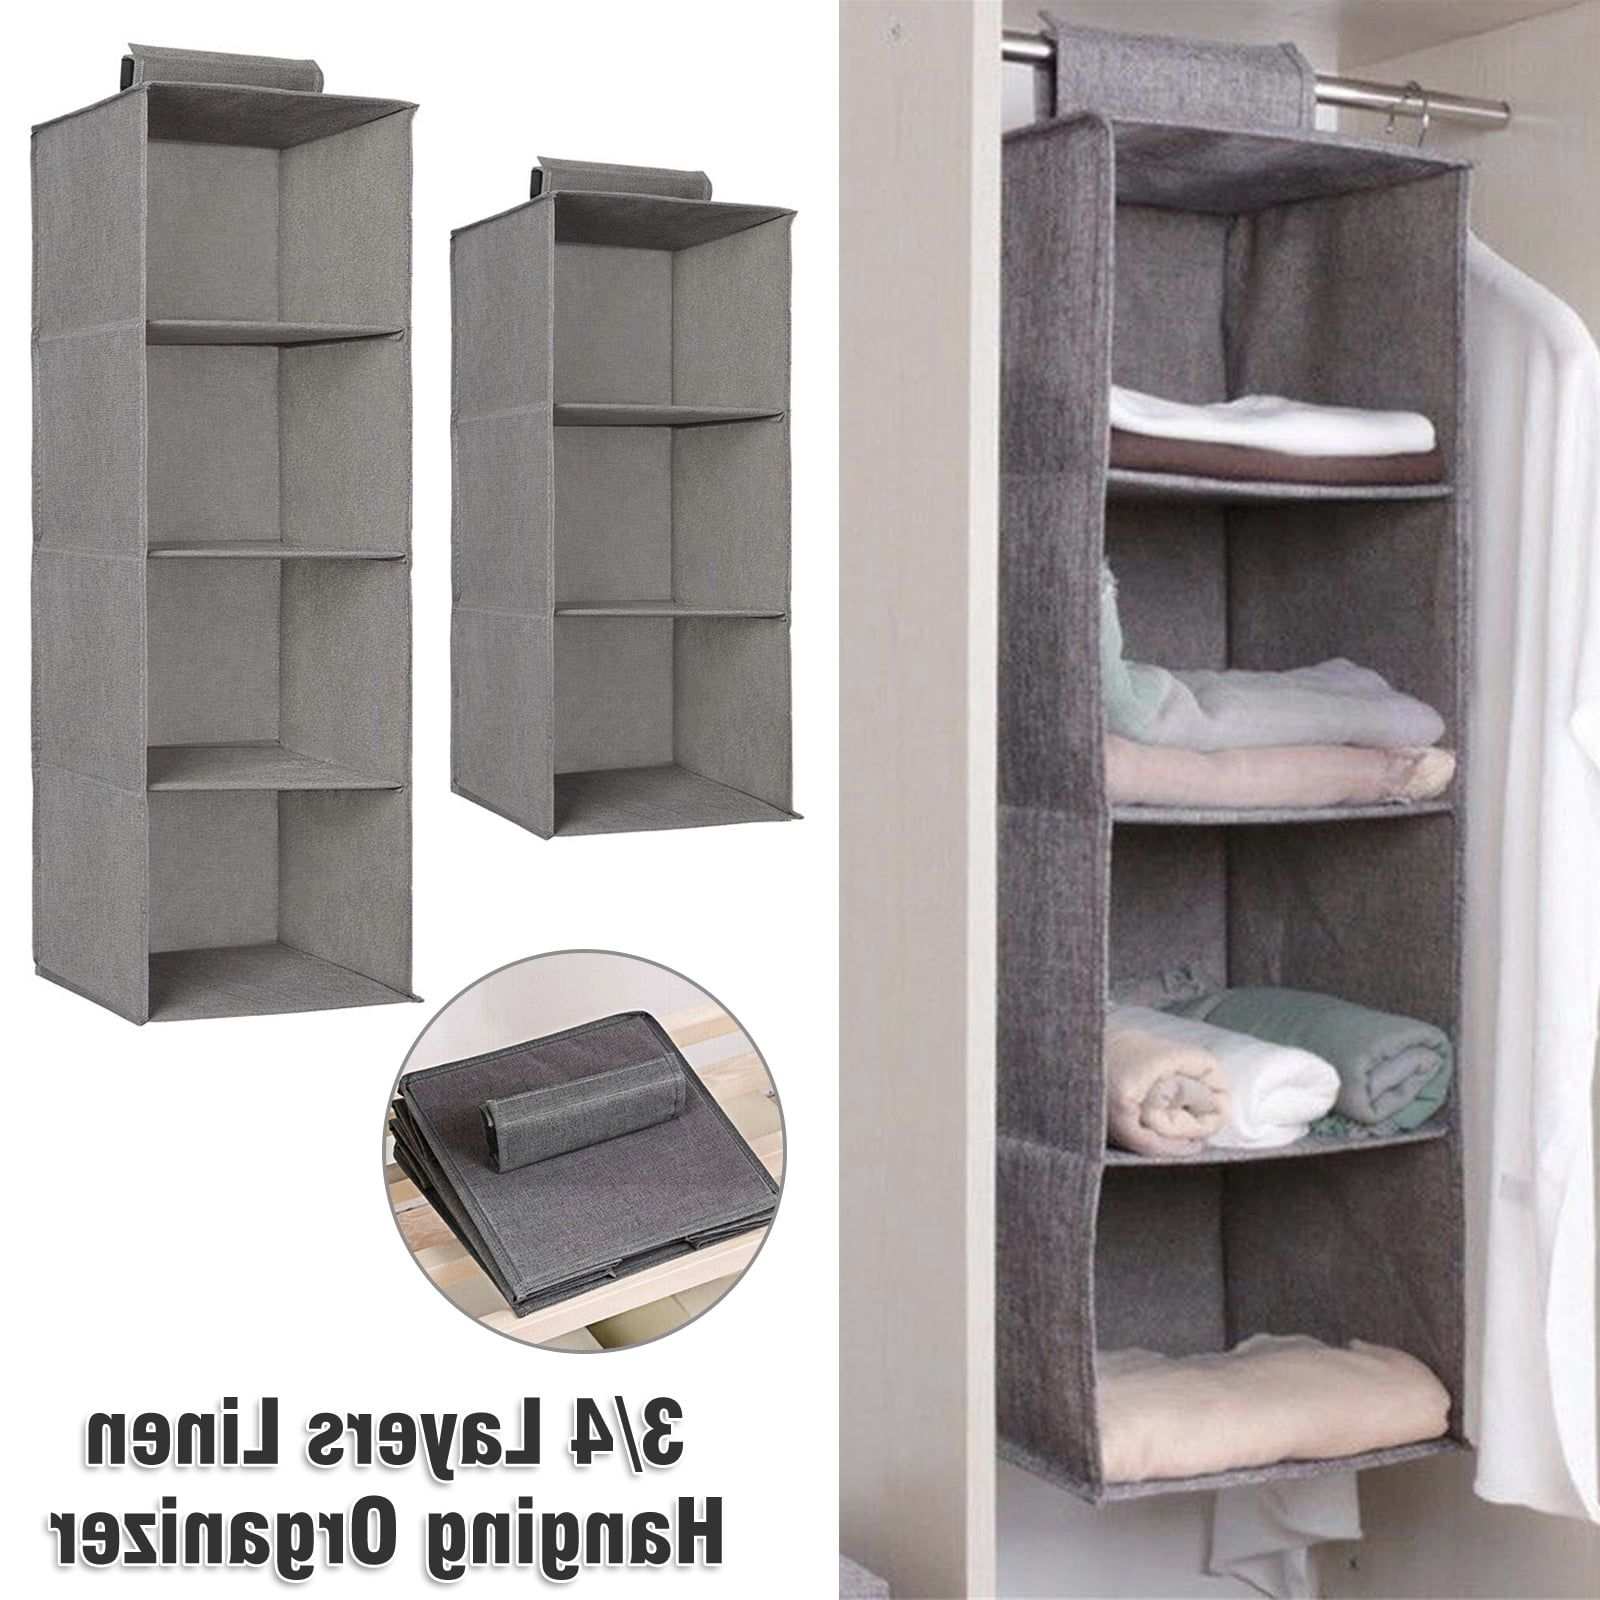 Tsv Hanging Closet Organizer, 3/4 Shelf Hanging Clothes Storage Box  Collapsible Accessory Shelves Hanging Closet Cubby For Sweater & Handbag  Organizer, Dorm Room Closet Organizers And Storage, Gray – Walmart Regarding 3 Shelf Hanging Shelves Wardrobes (Gallery 1 of 20)